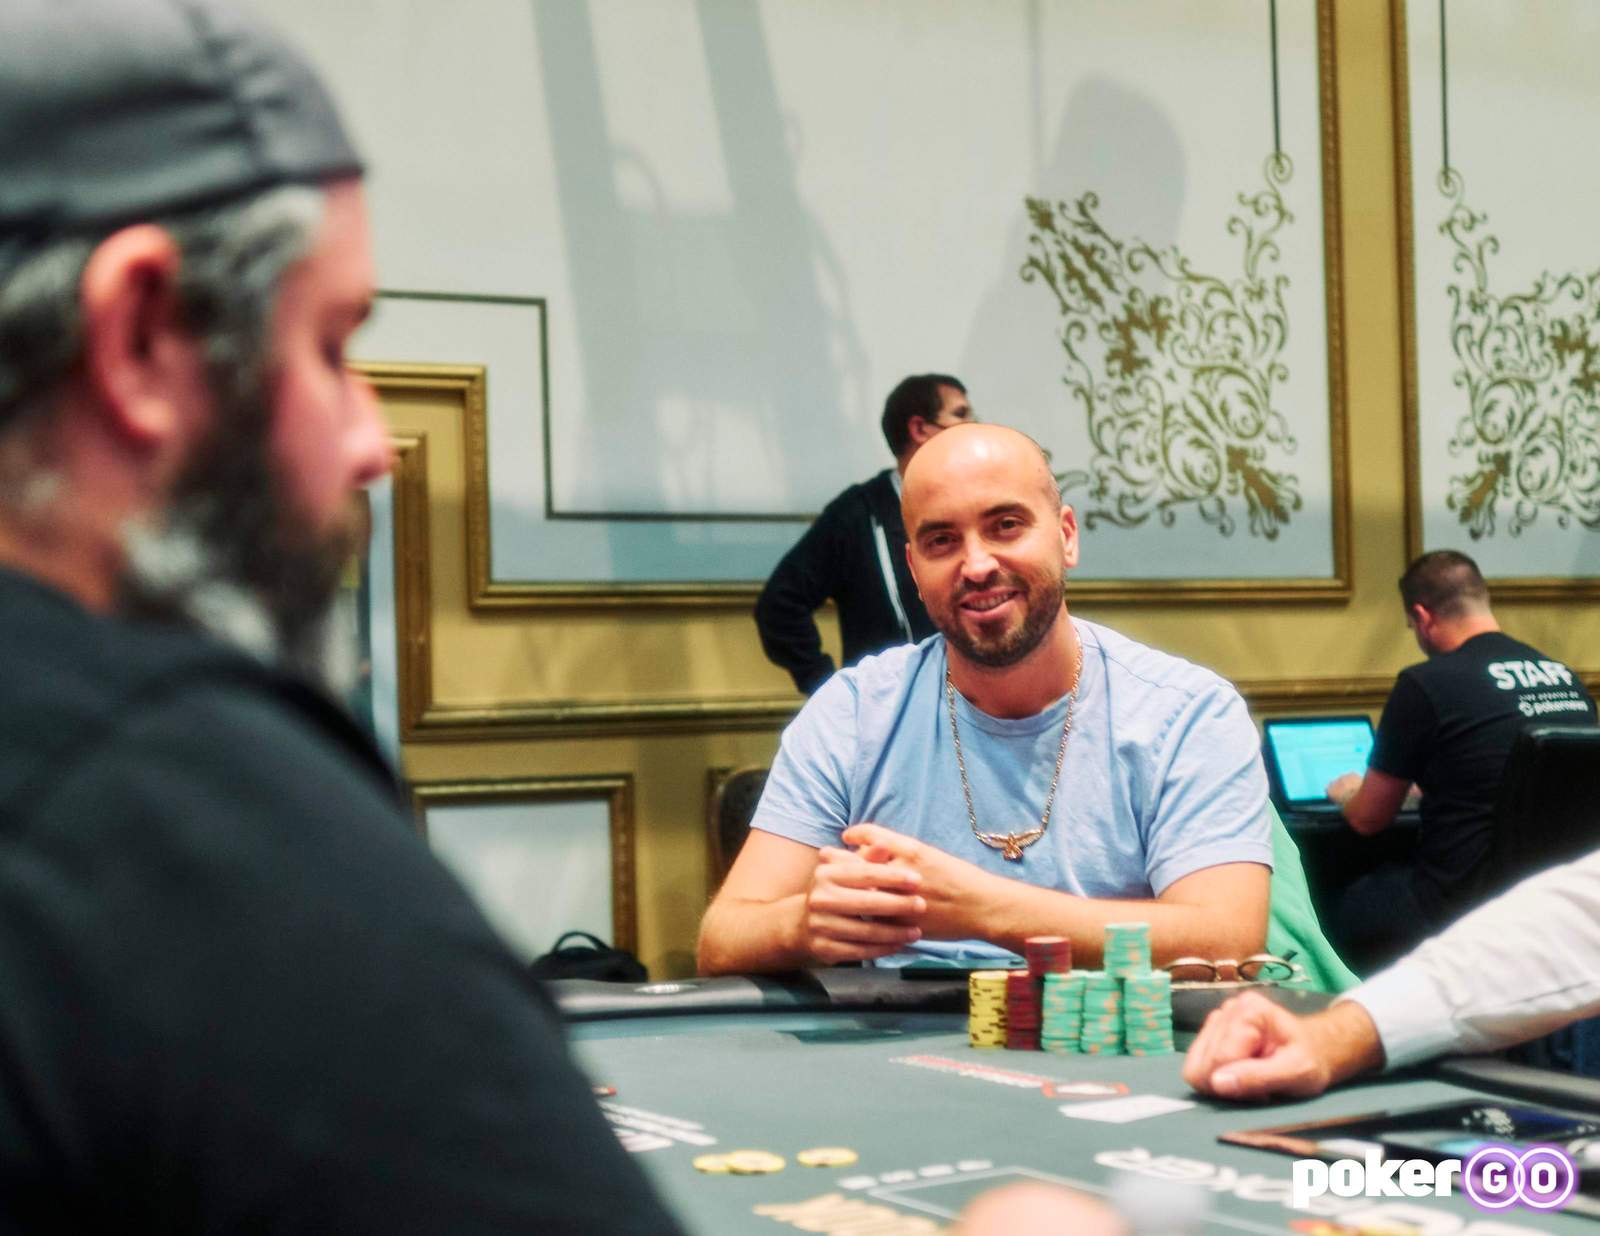 WSOP Day 28 Recap: Bryn Kenney Leads Poker Players Championship After Day 2, Smidinger Wins Seniors Championship